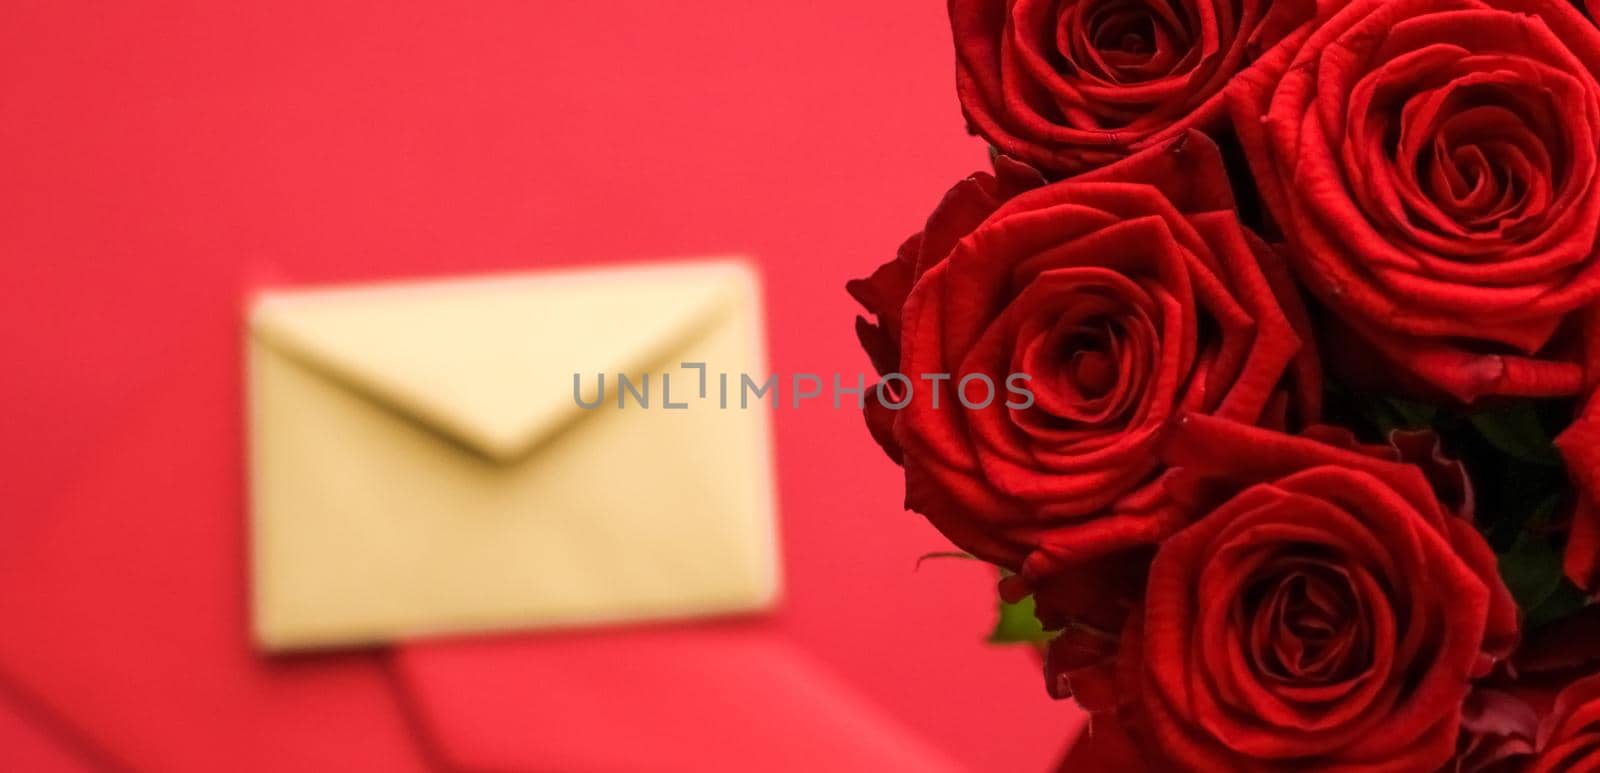 Love letter and flower delivery service on Valentines Day, luxury bouquet of red roses and card envelopes on red background by Anneleven